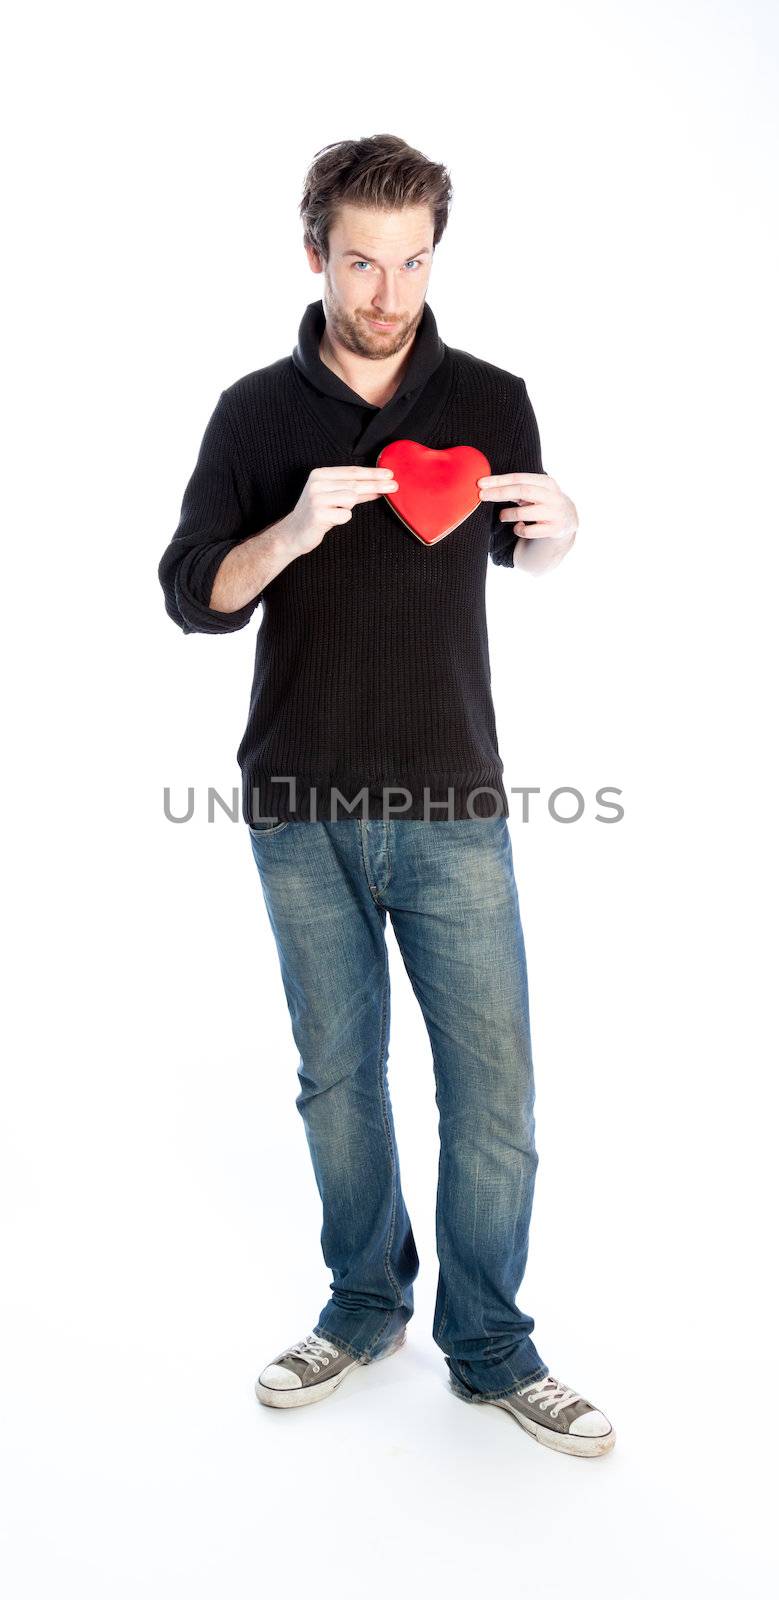 Romantic people in love shot in studio isolated on a white background